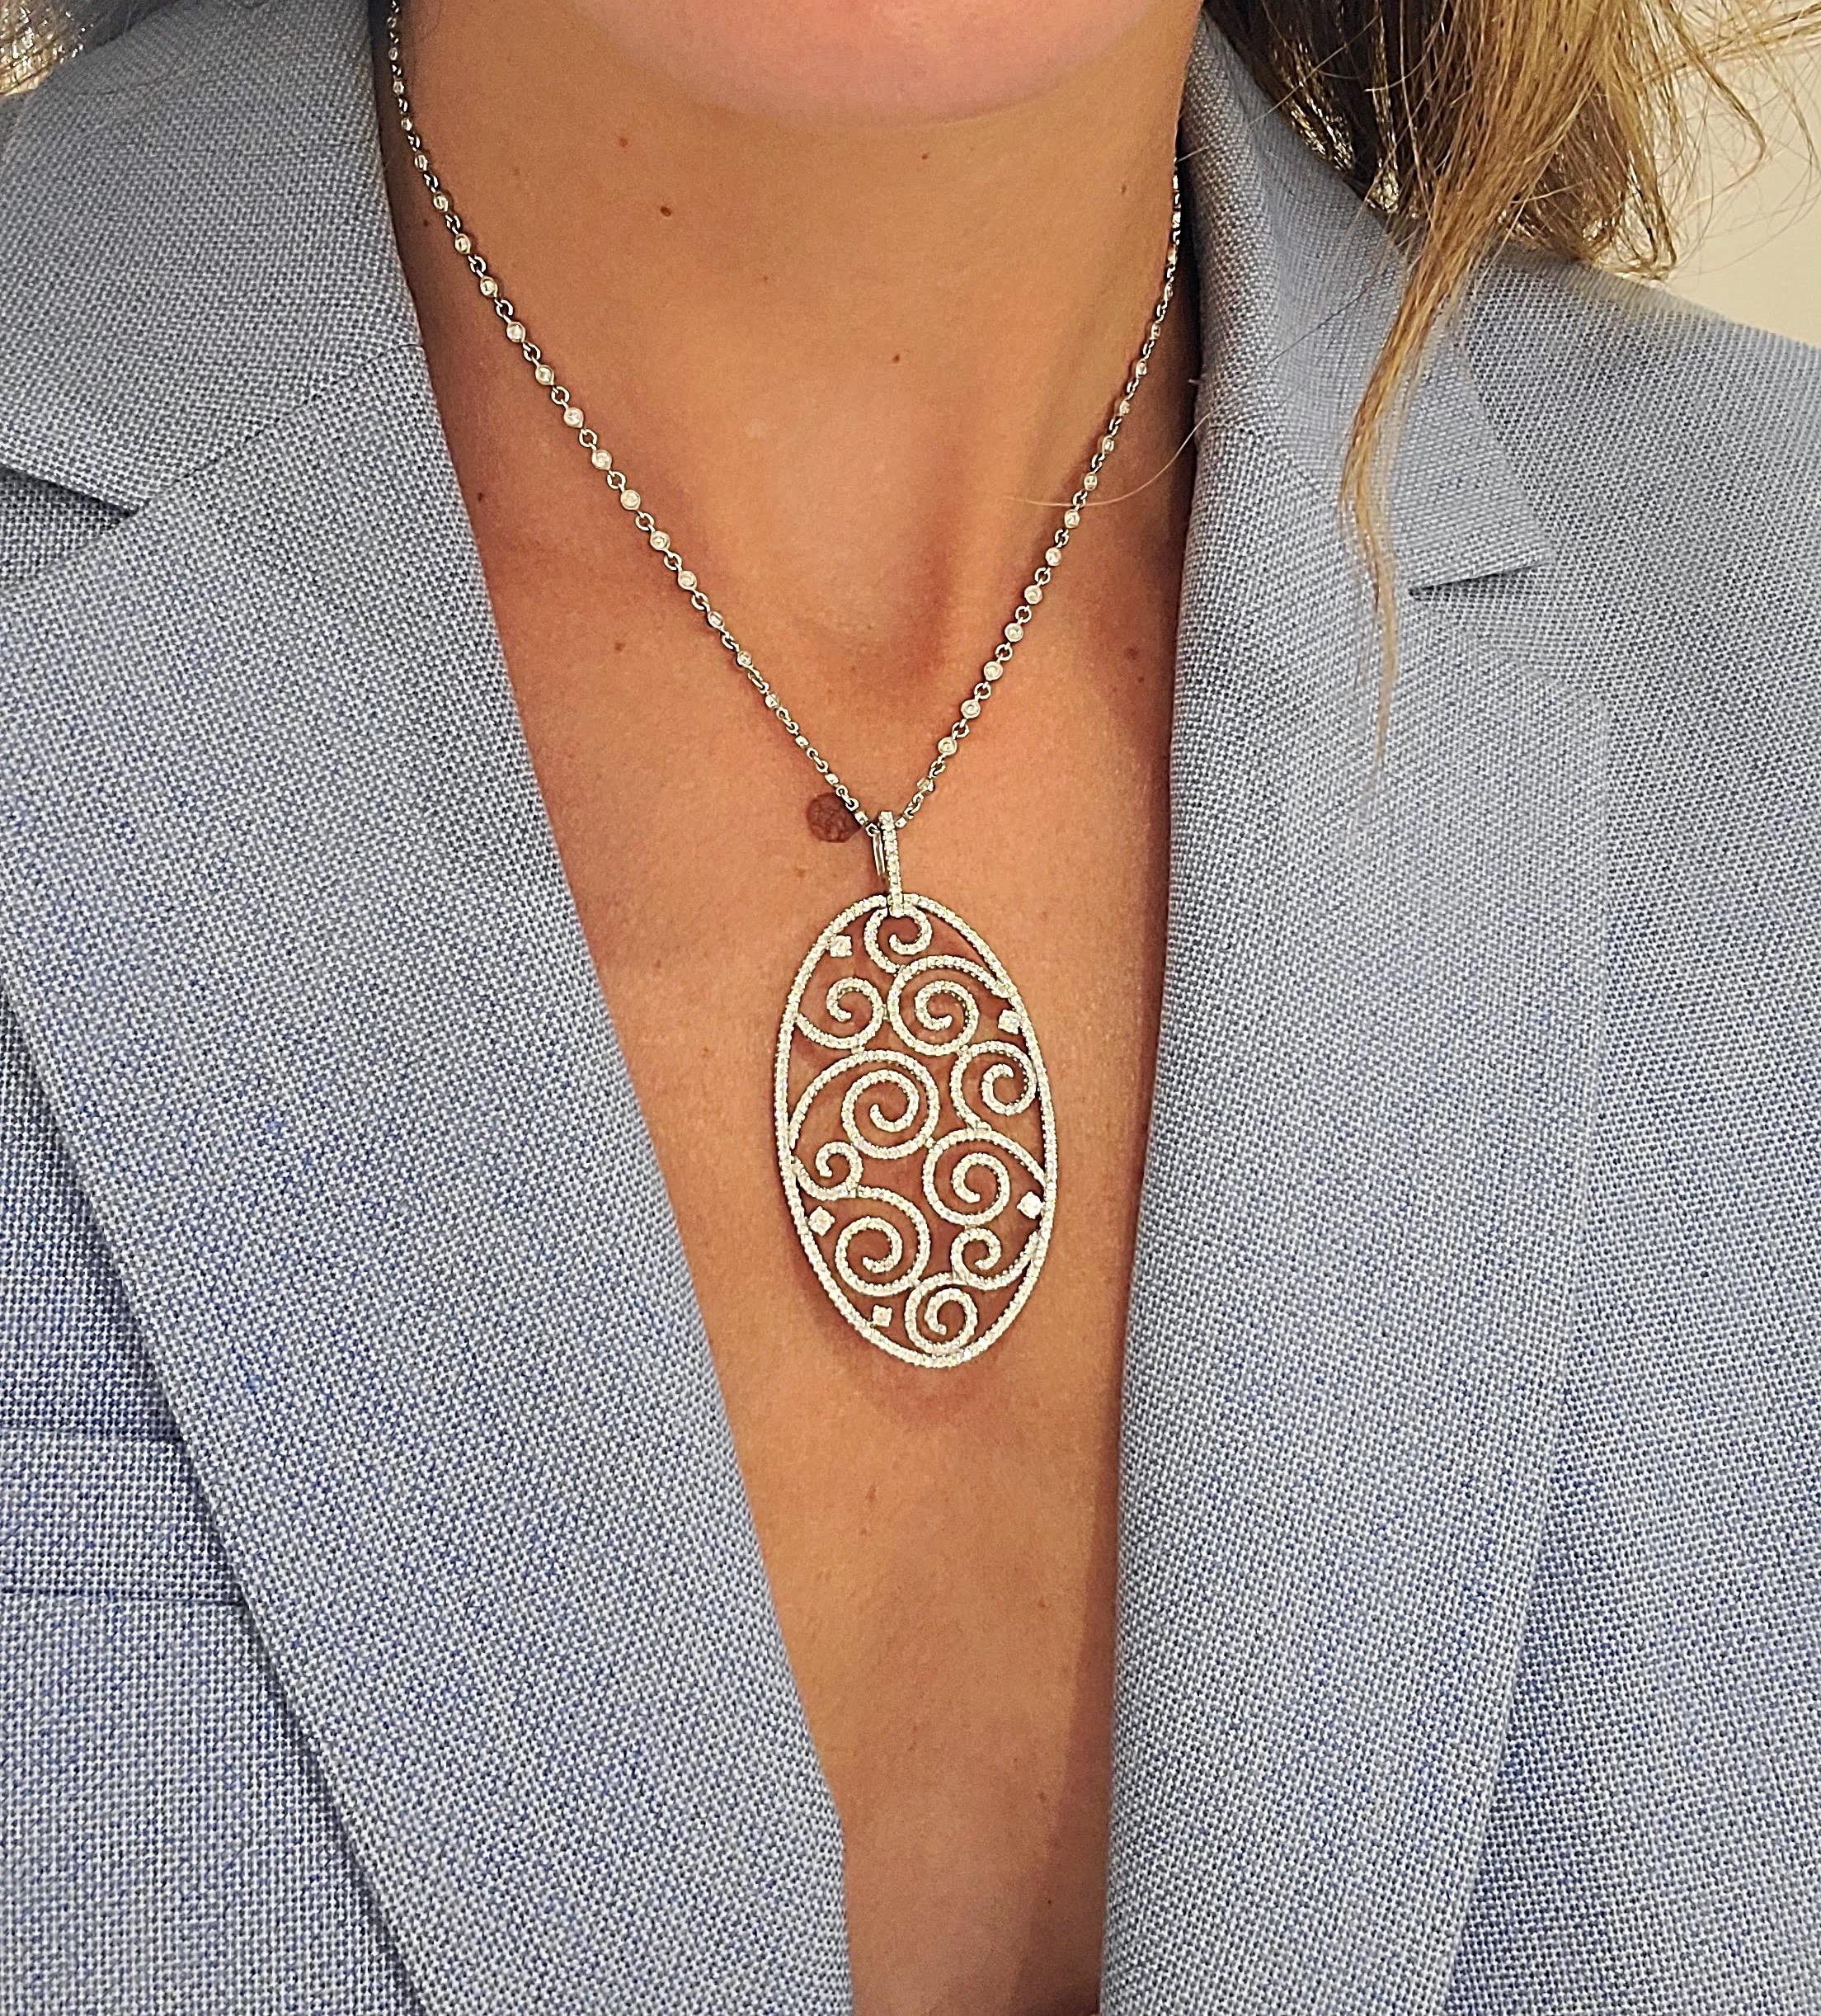 This 18 karat white gold oval  pendant is set entirely with round brilliant Diamonds in a swirly pattern. The pendant hangs from a 16